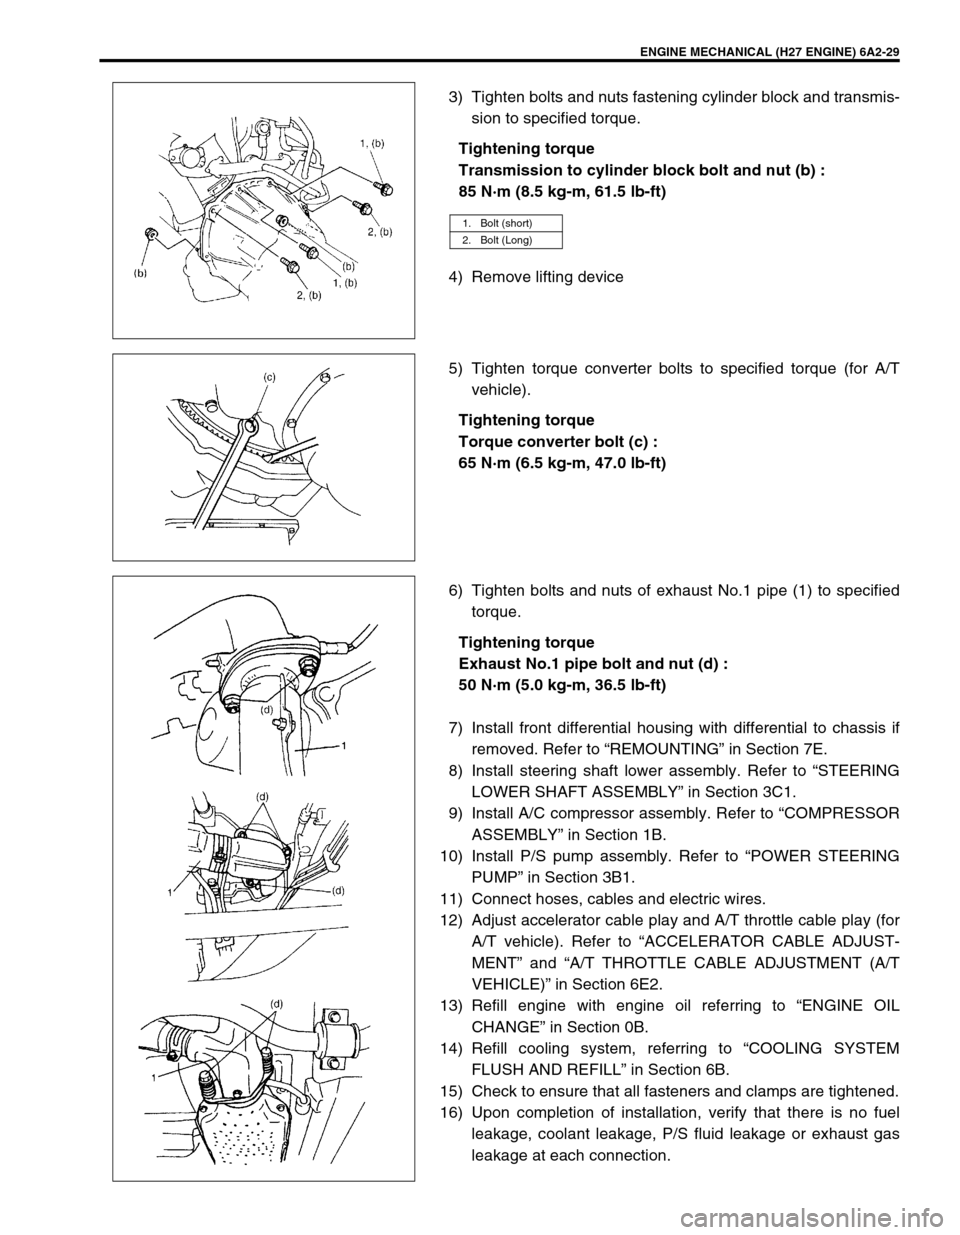 SUZUKI GRAND VITARA 1999 2.G Service Manual ENGINE MECHANICAL (H27 ENGINE) 6A2-29
3) Tighten bolts and nuts fastening cylinder block and transmis-
sion to specified torque.
Tightening torque
Transmission to cylinder block bolt and nut (b) :
85 